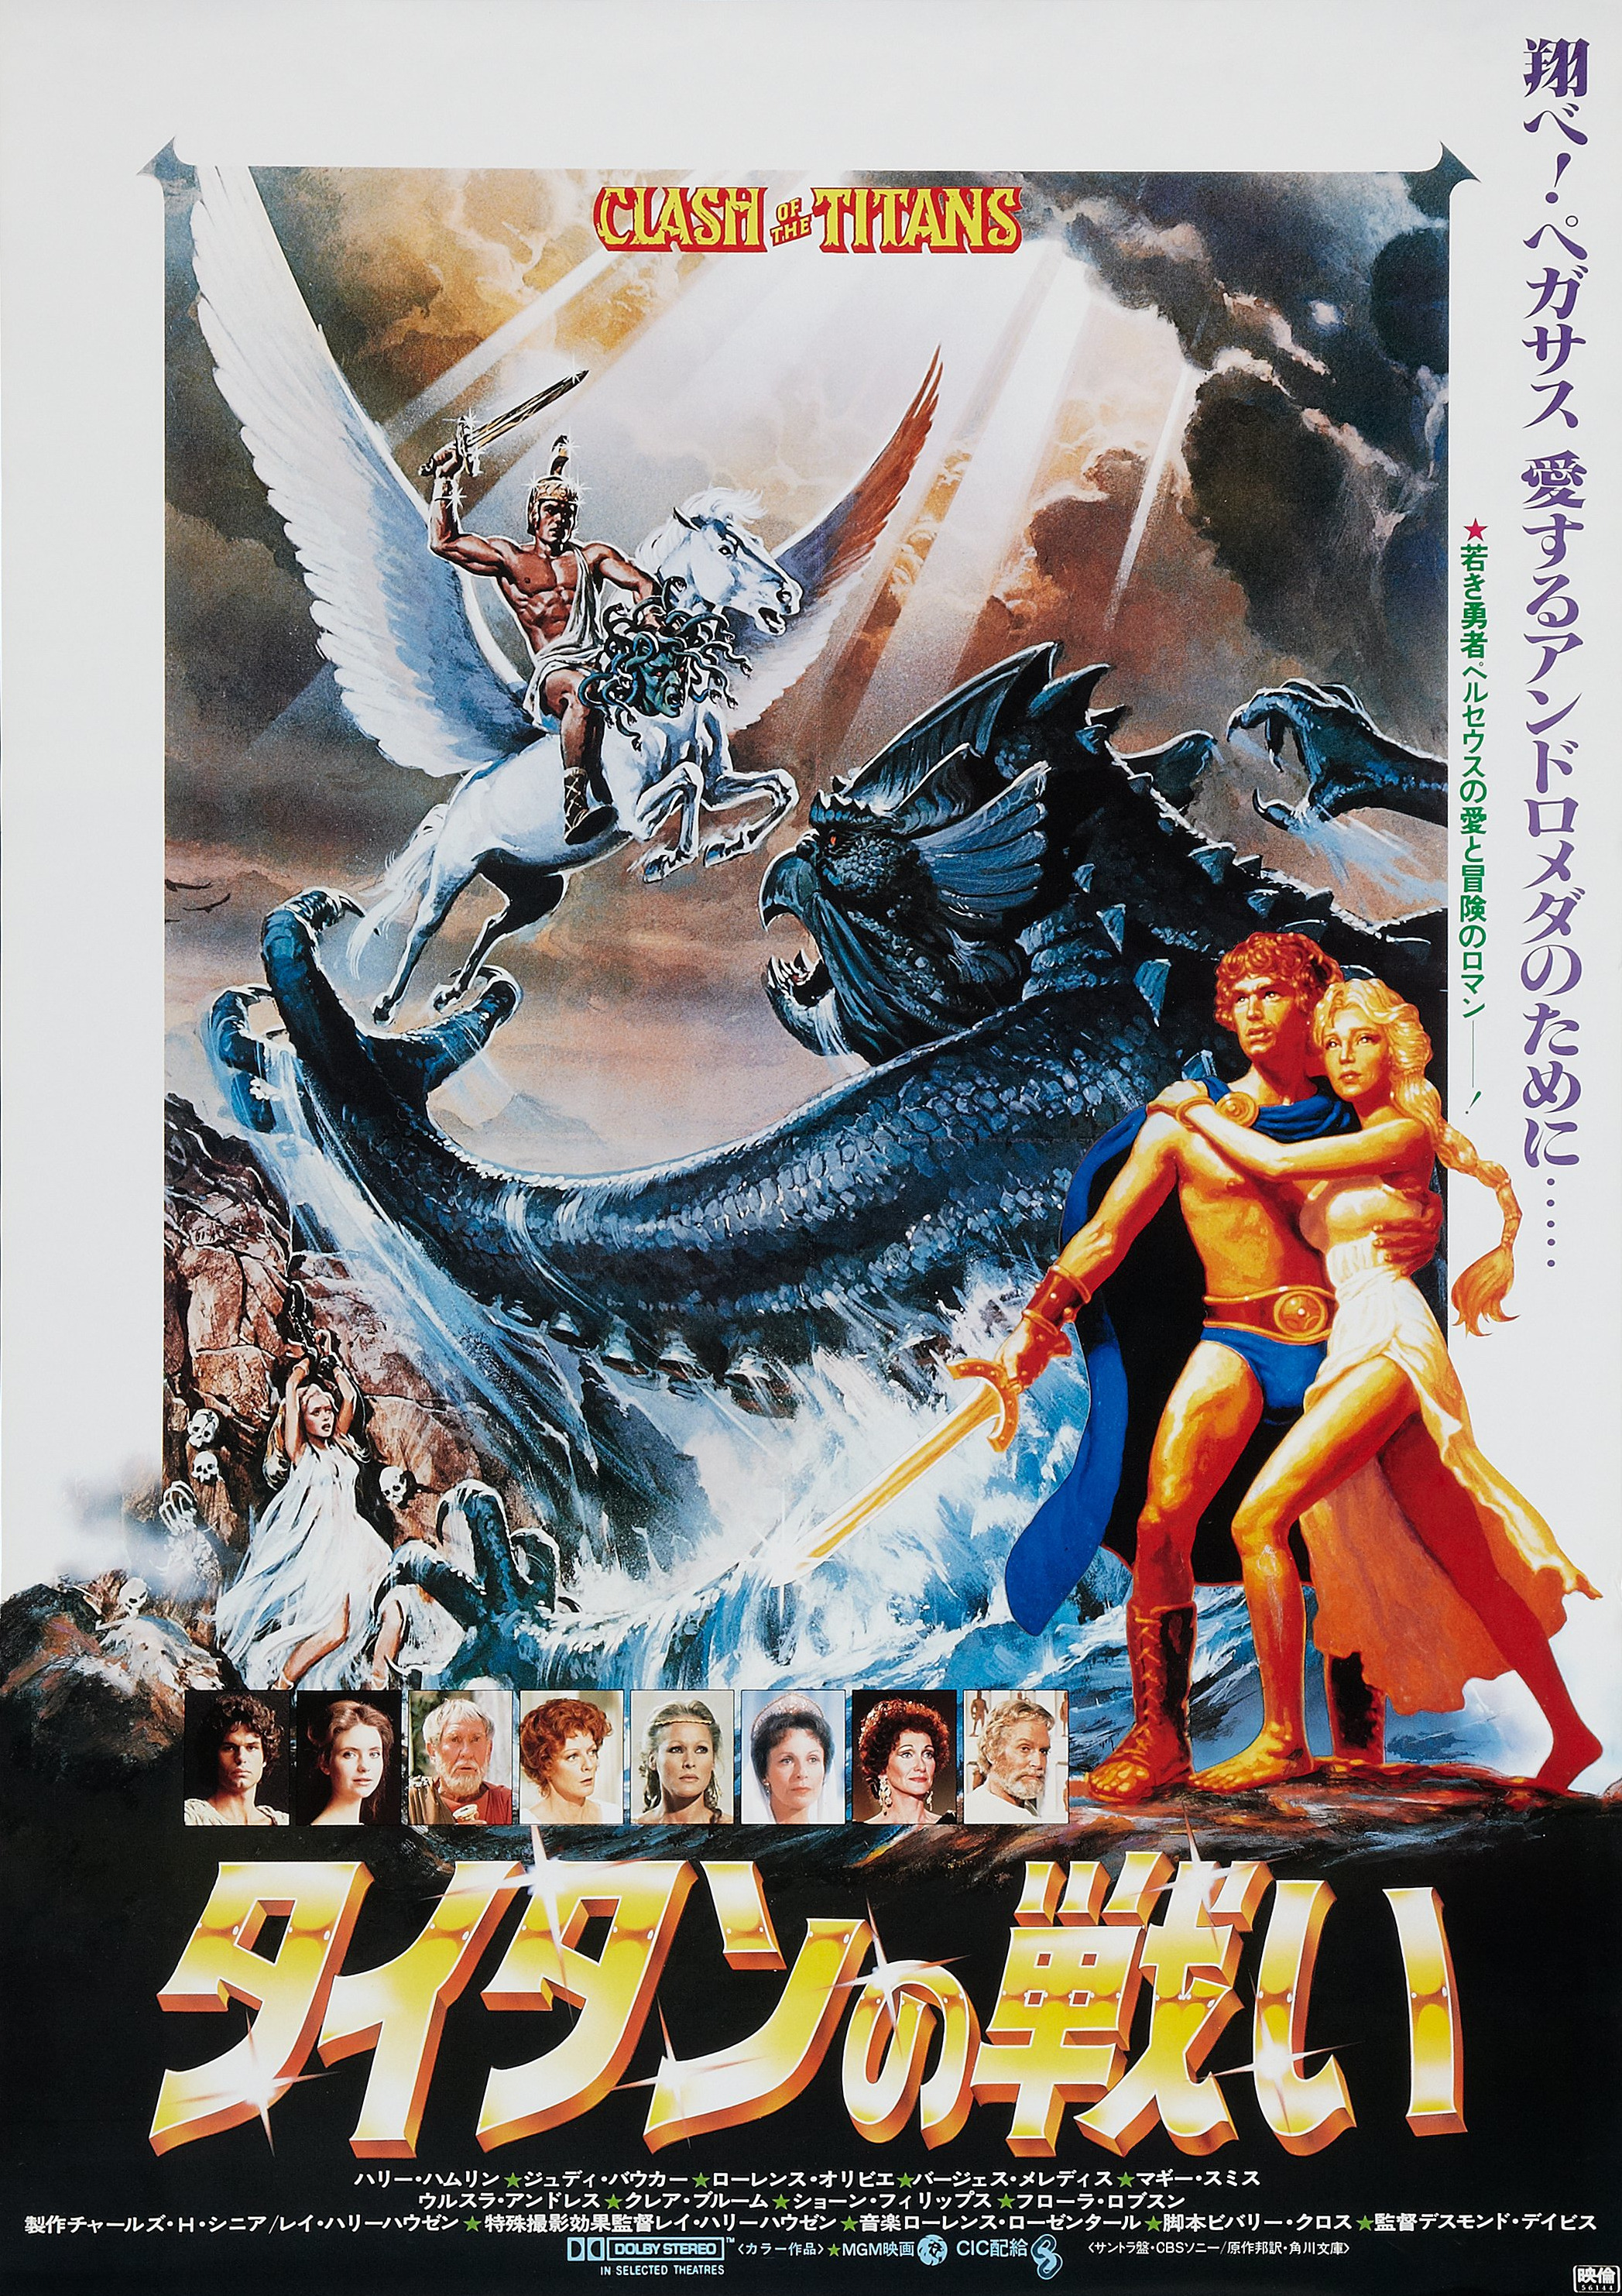 Mega Sized Movie Poster Image for Clash of the Titans (#7 of 7)